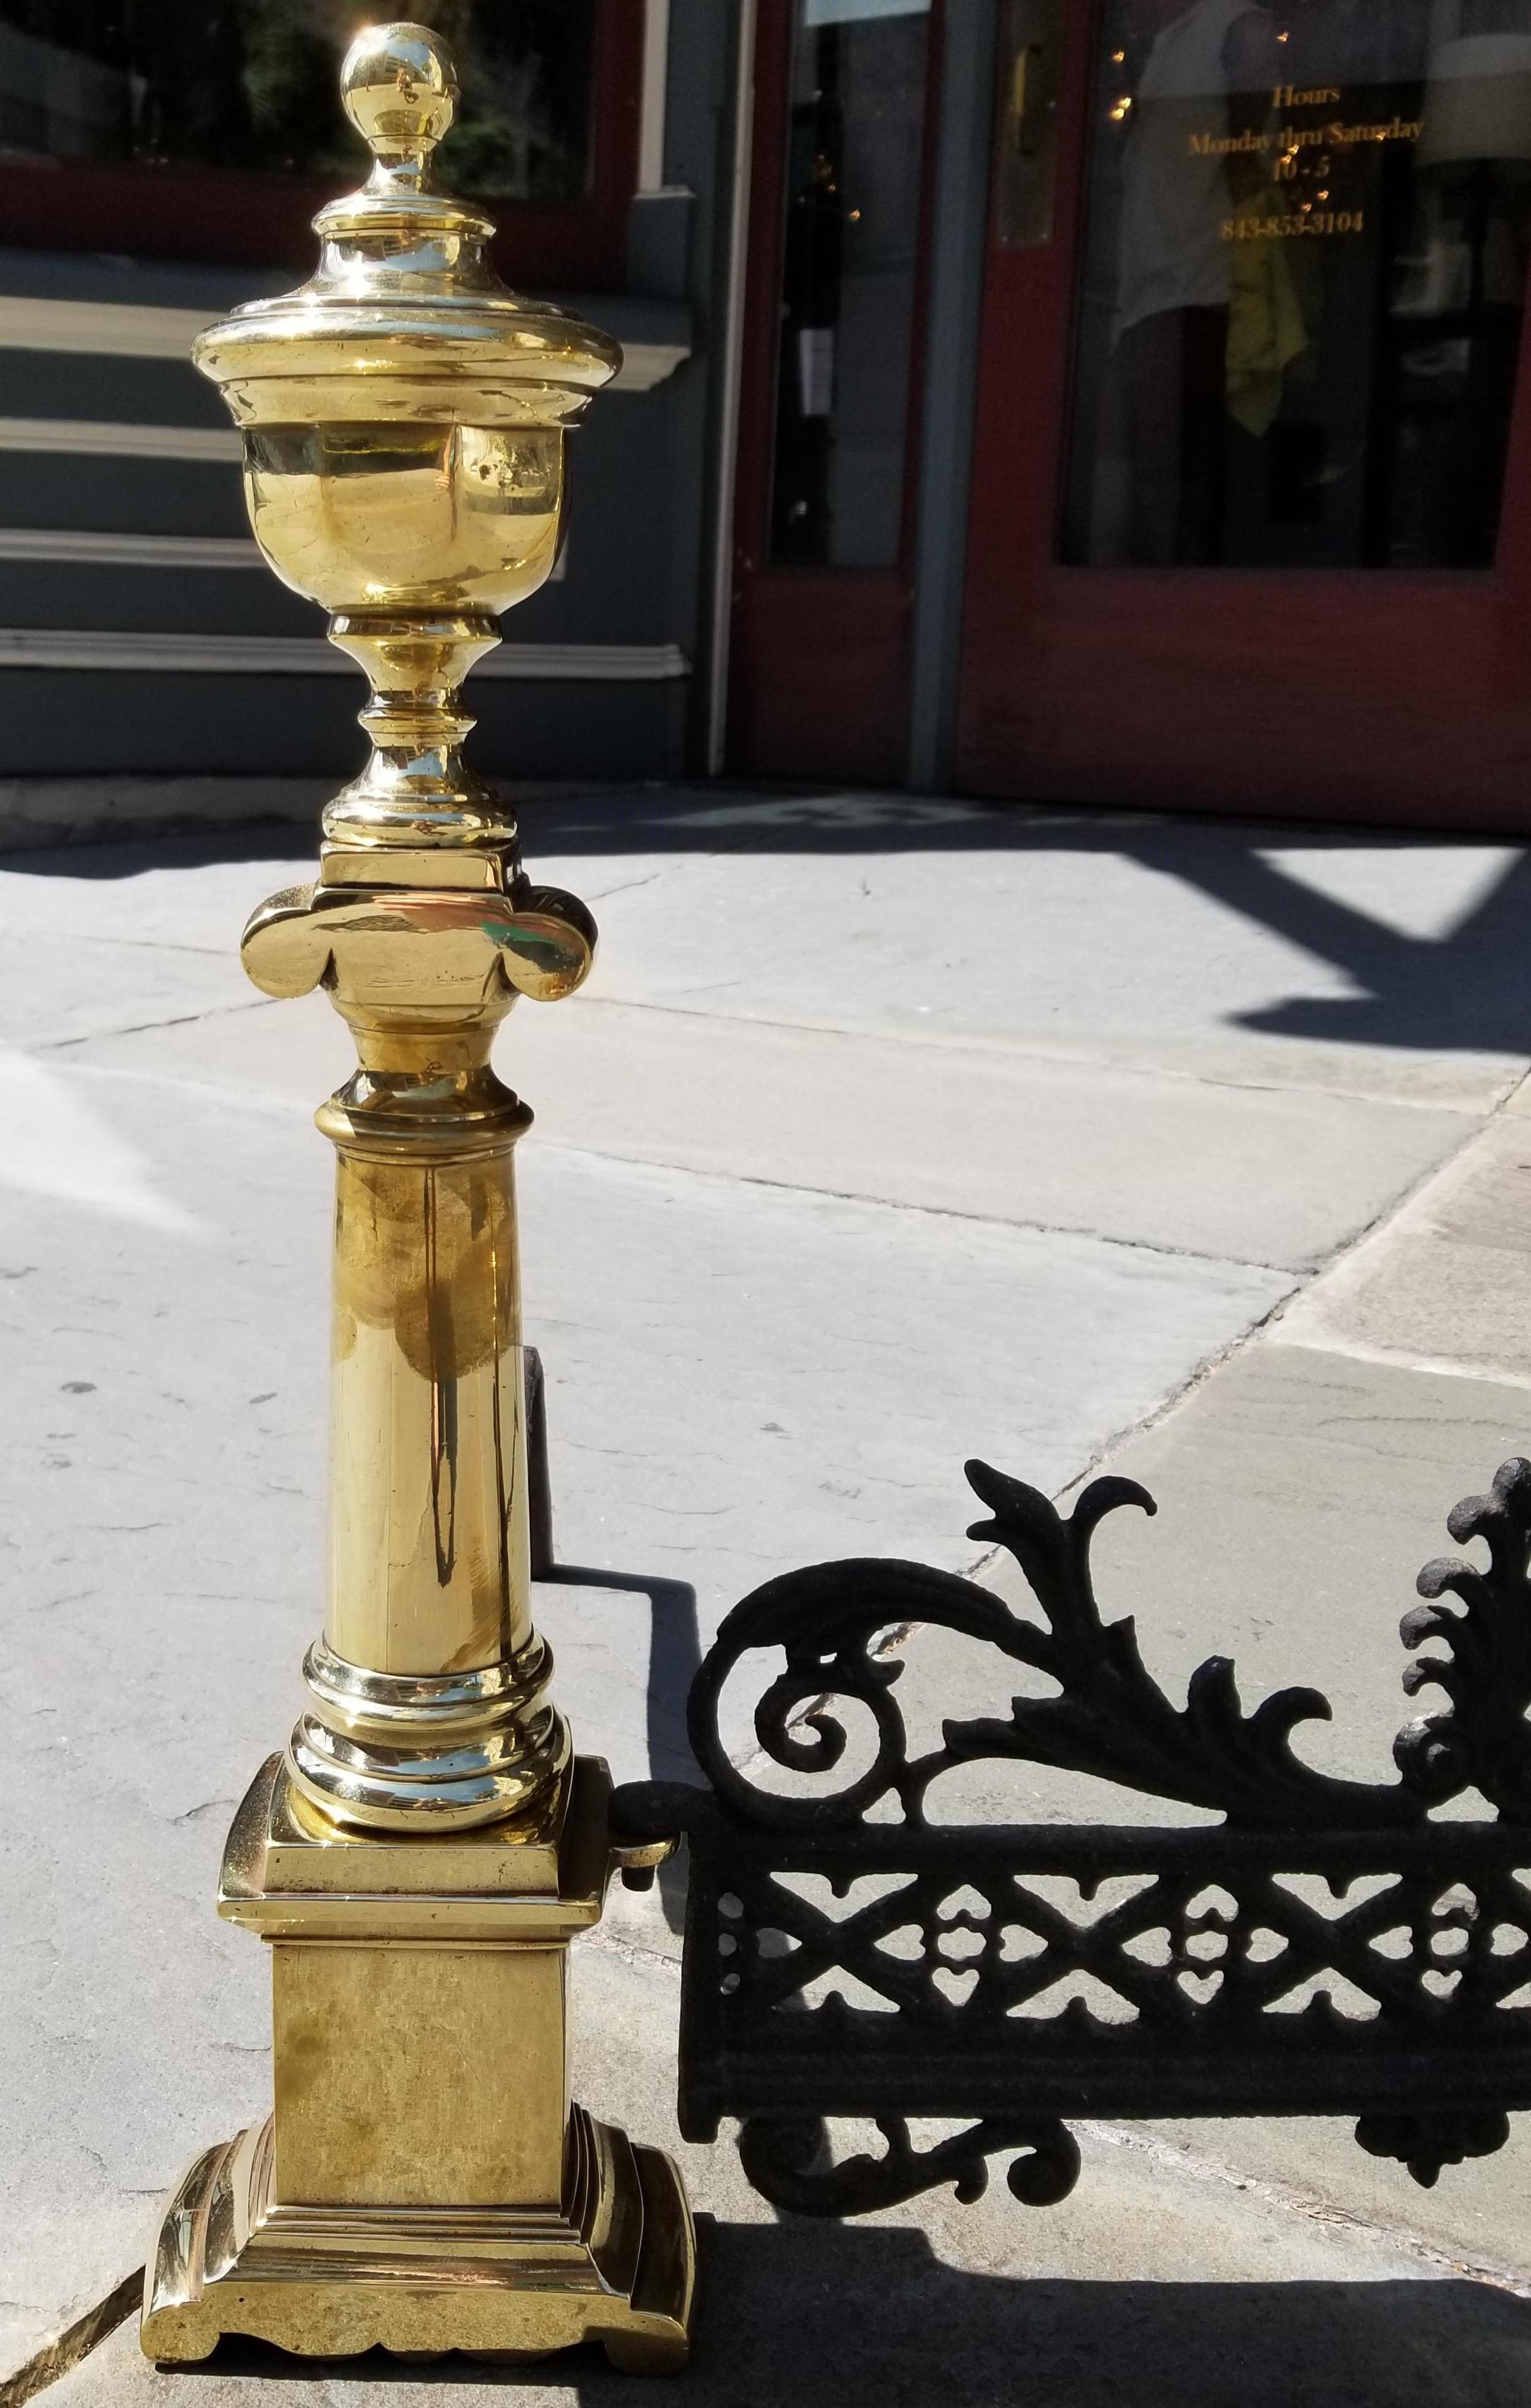 A rare pair of Charleston neoclassical brass andirons, circa 1810, with the original cast iron fender. The total width of the andirons and fender set is 24.75